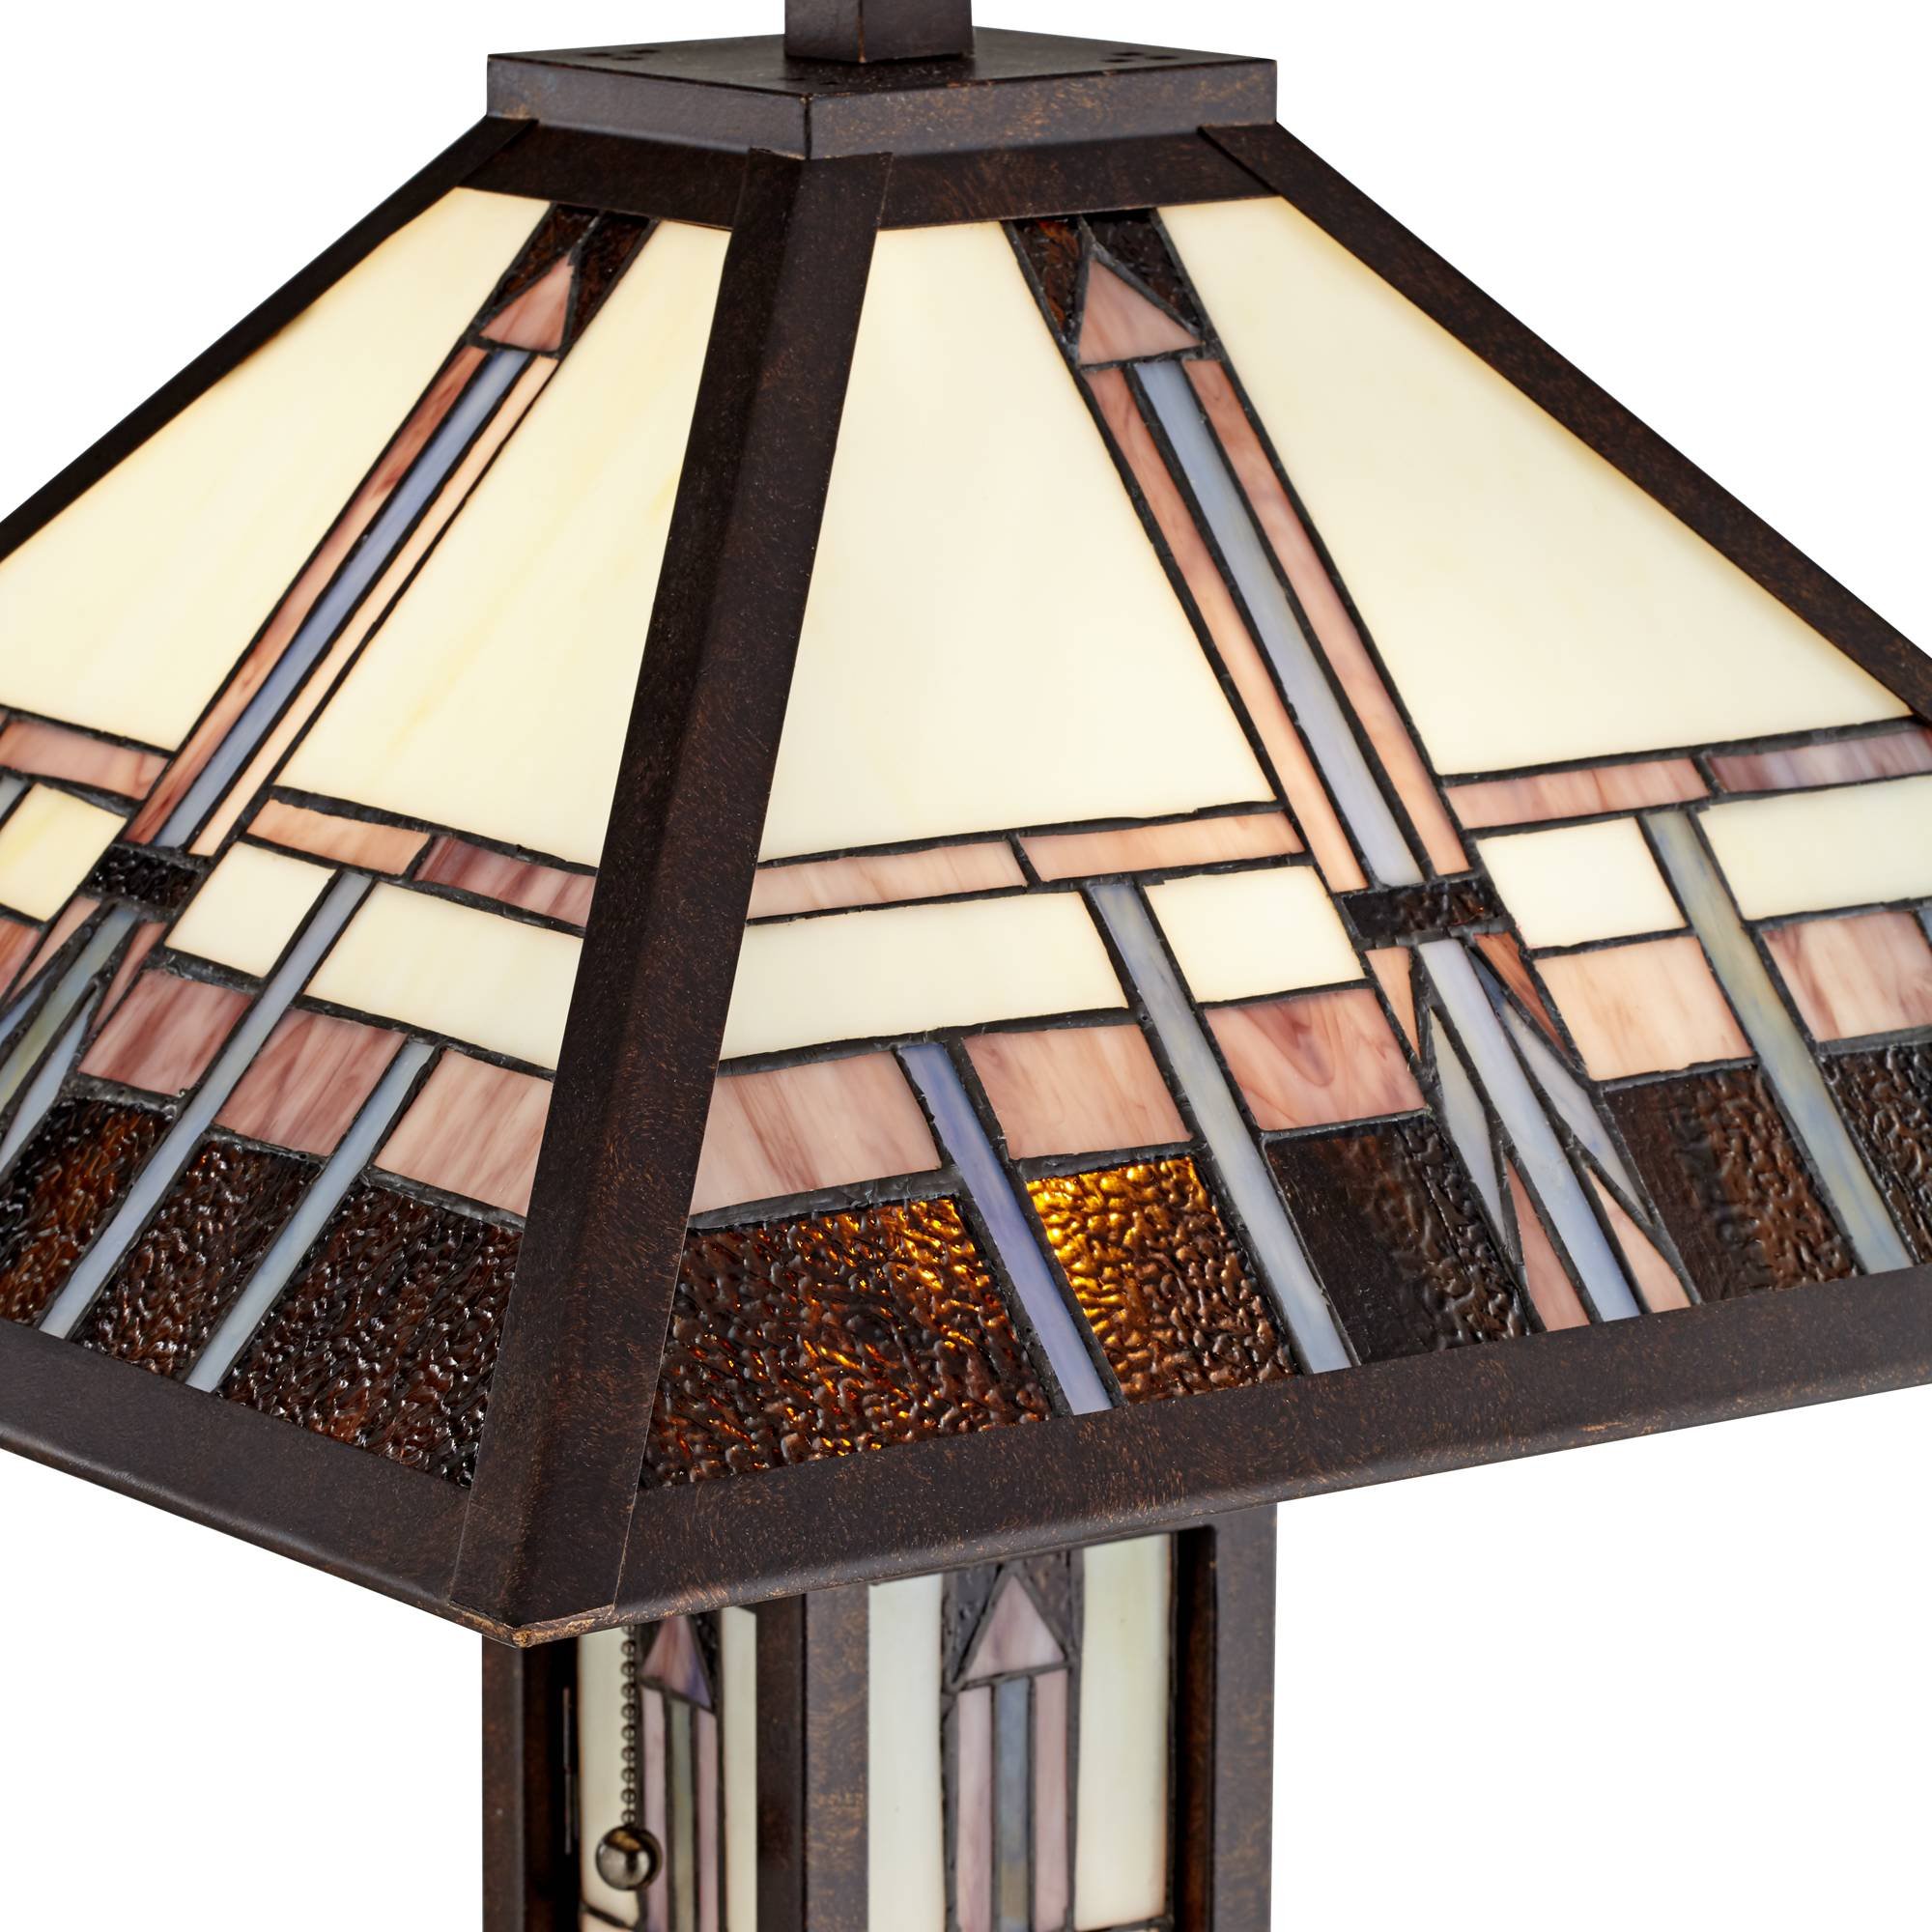 Robert Louis Tiffany Mission Southwest Tiffany Style Standing Floor Lamp with Night Light Art Deco 60.5" Tall Oiled Bronze Copper Stained Glass Shade Decor for Living Room Reading House Bedroom